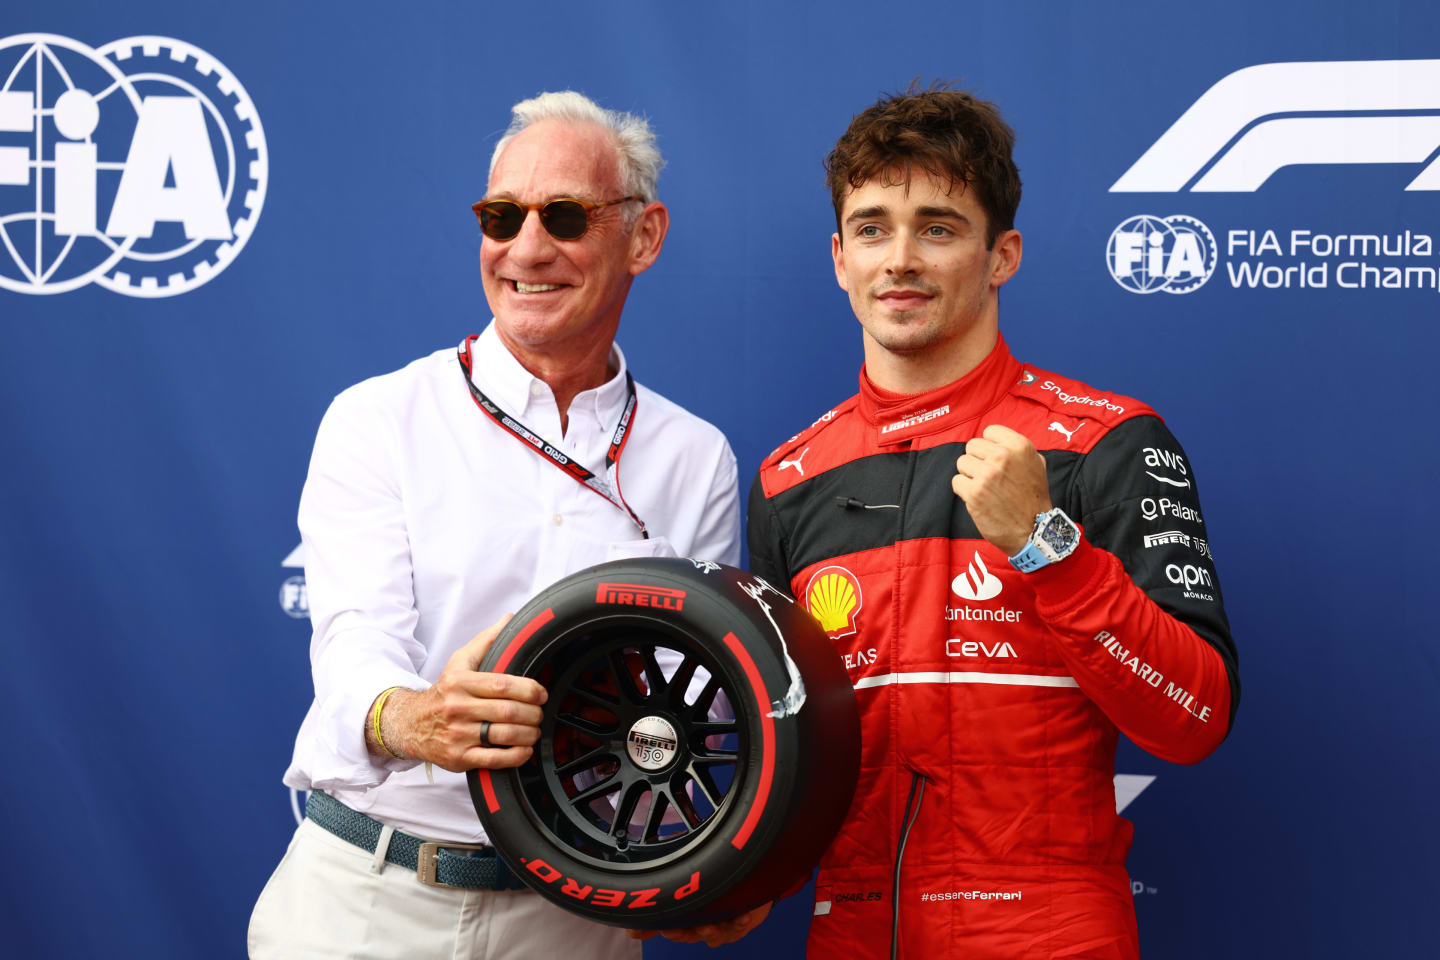 MONTE-CARLO, MONACO - MAY 28: Pole position qualifier Charles Leclerc of Monaco and Ferrari is presented with the Pirelli Pole Position trophy by Liberty CEO Greg Maffei during qualifying ahead of the F1 Grand Prix of Monaco at Circuit de Monaco on May 28, 2022 in Monte-Carlo, Monaco. (Photo by Mark Thompson/Getty Images)